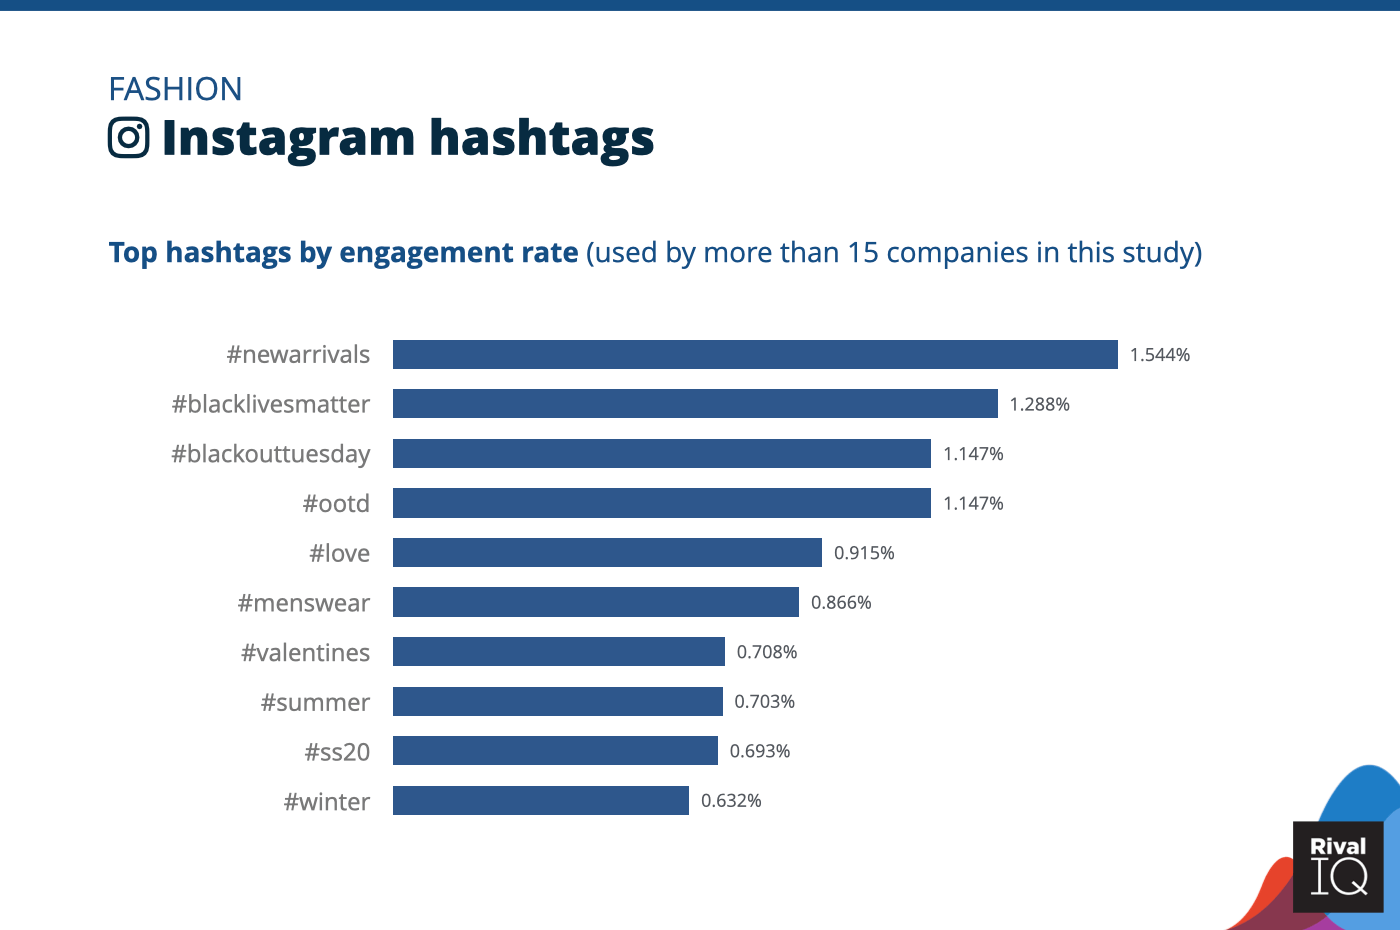 Chart of Top Instagram hashtags by engagement rate, Fashion